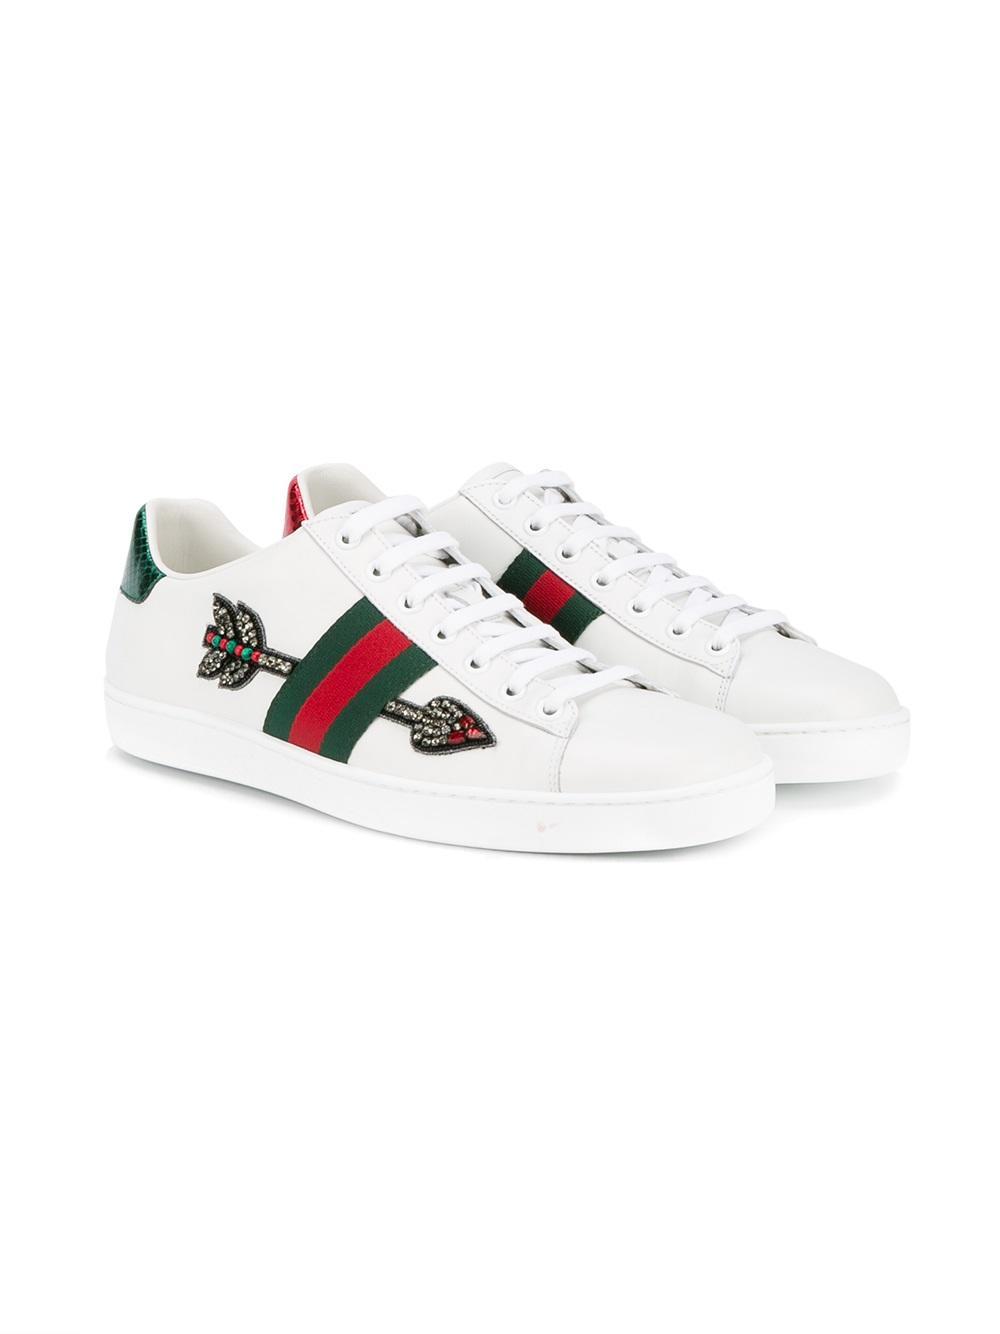 Gucci Ace Sneakers With Lateral Band And Embroidered Arrow | Lyst